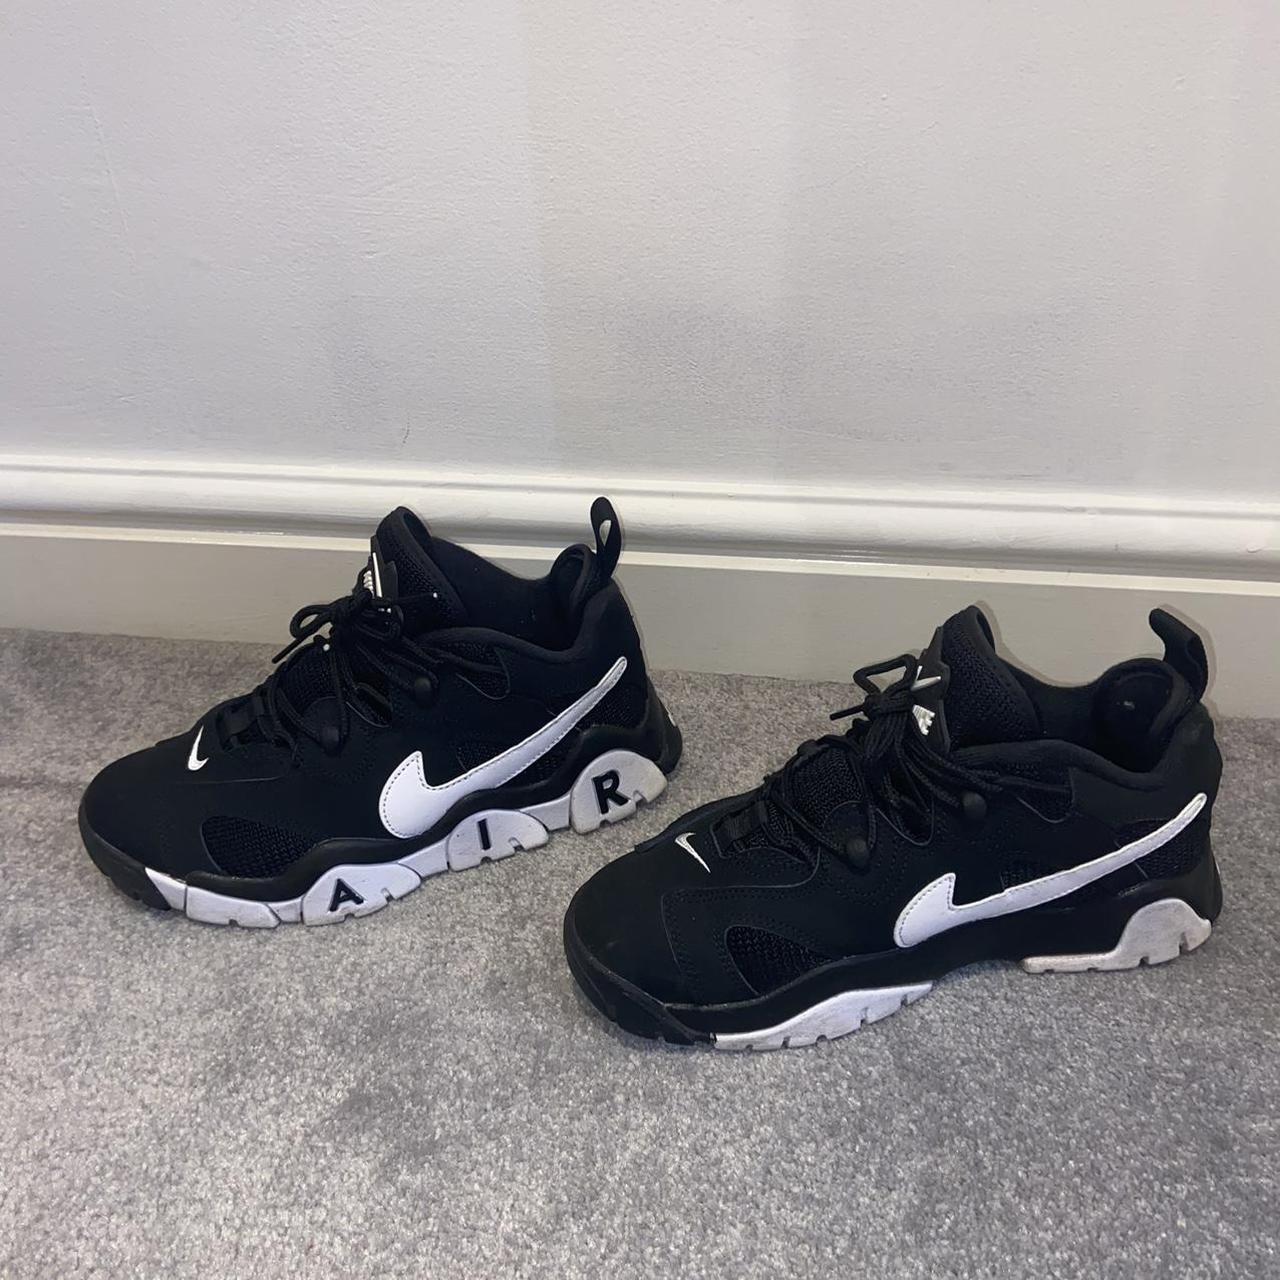 Nike Air trainers size 5 and in good condition with... Depop